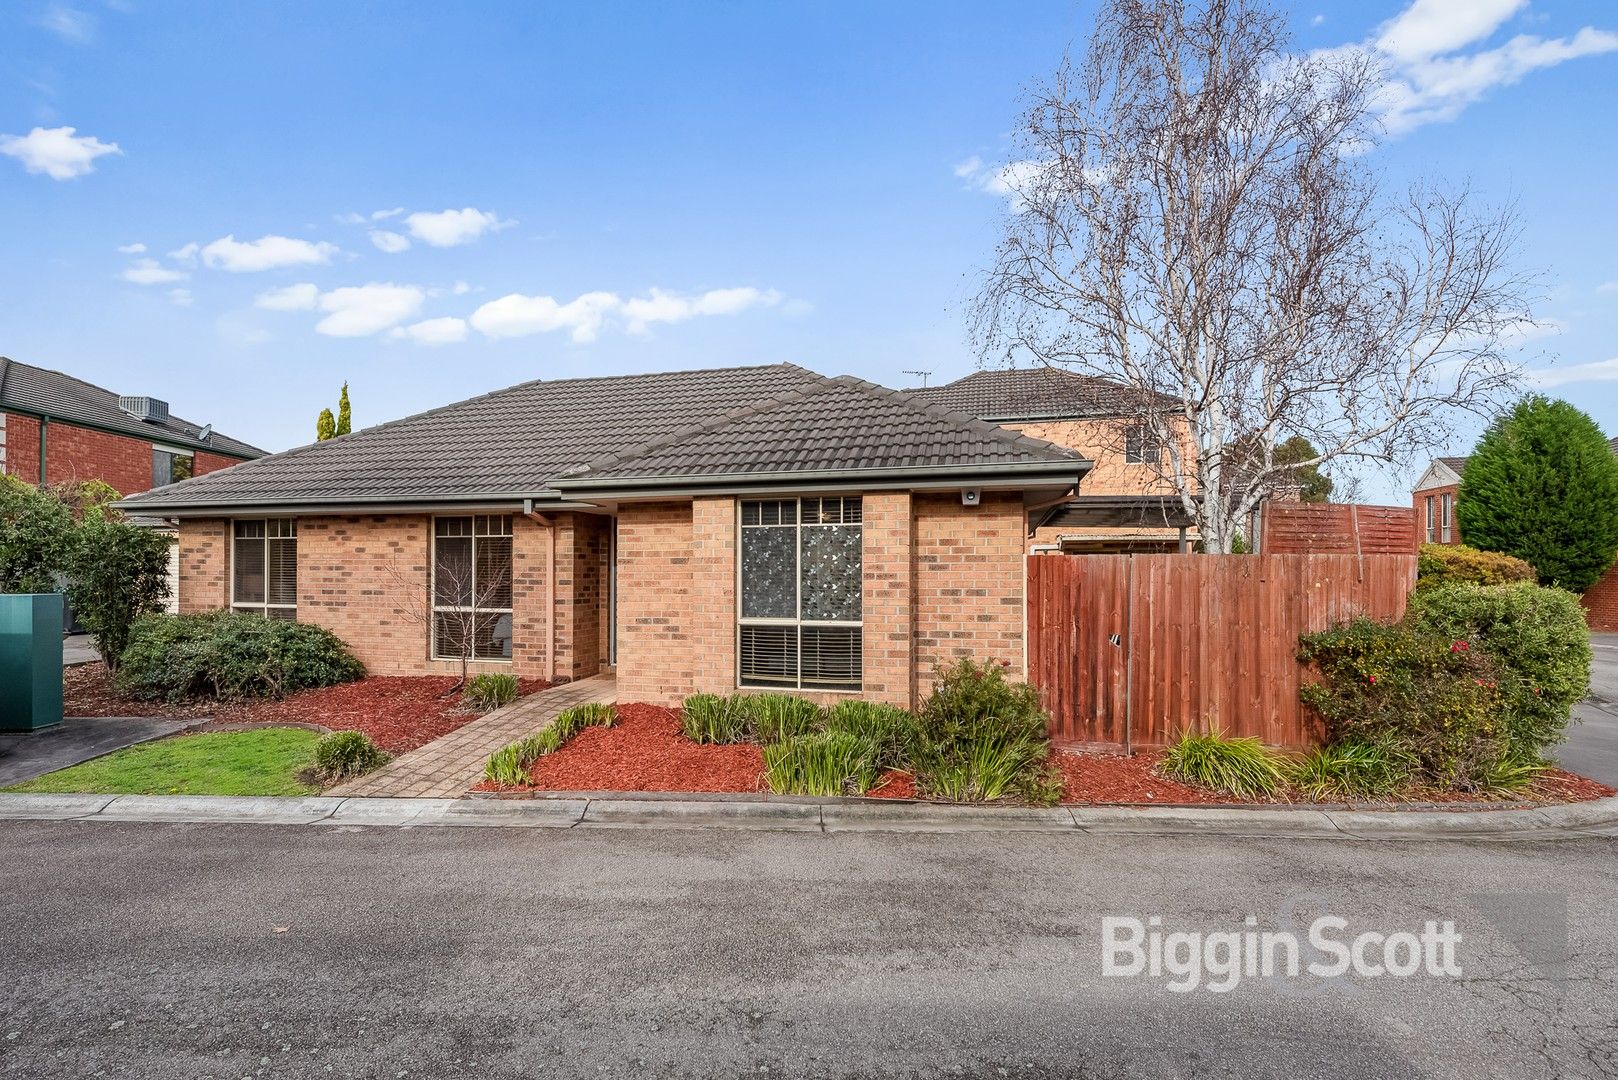 1/19 Earls Court, Wantirna South VIC 3152, Image 0